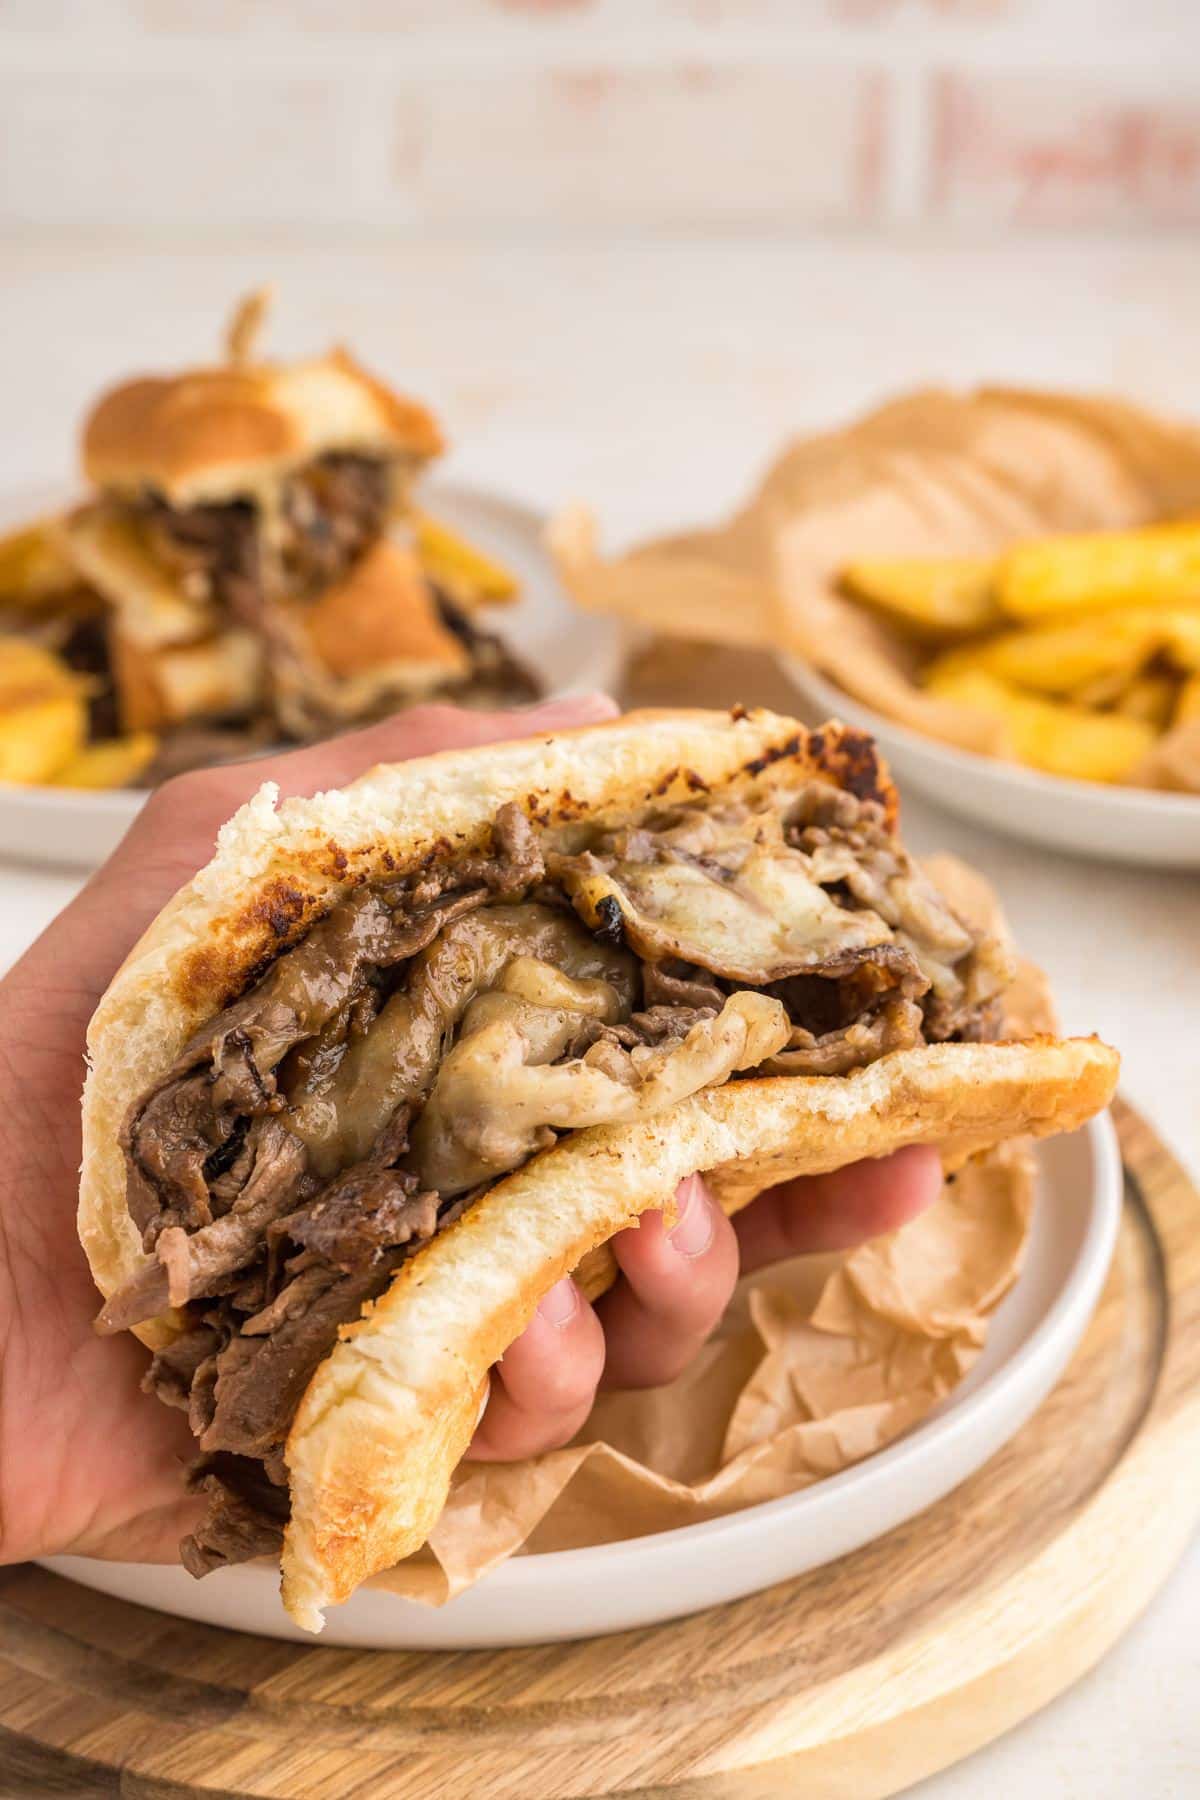 Shaved steak sandwich in had with french fries behind.